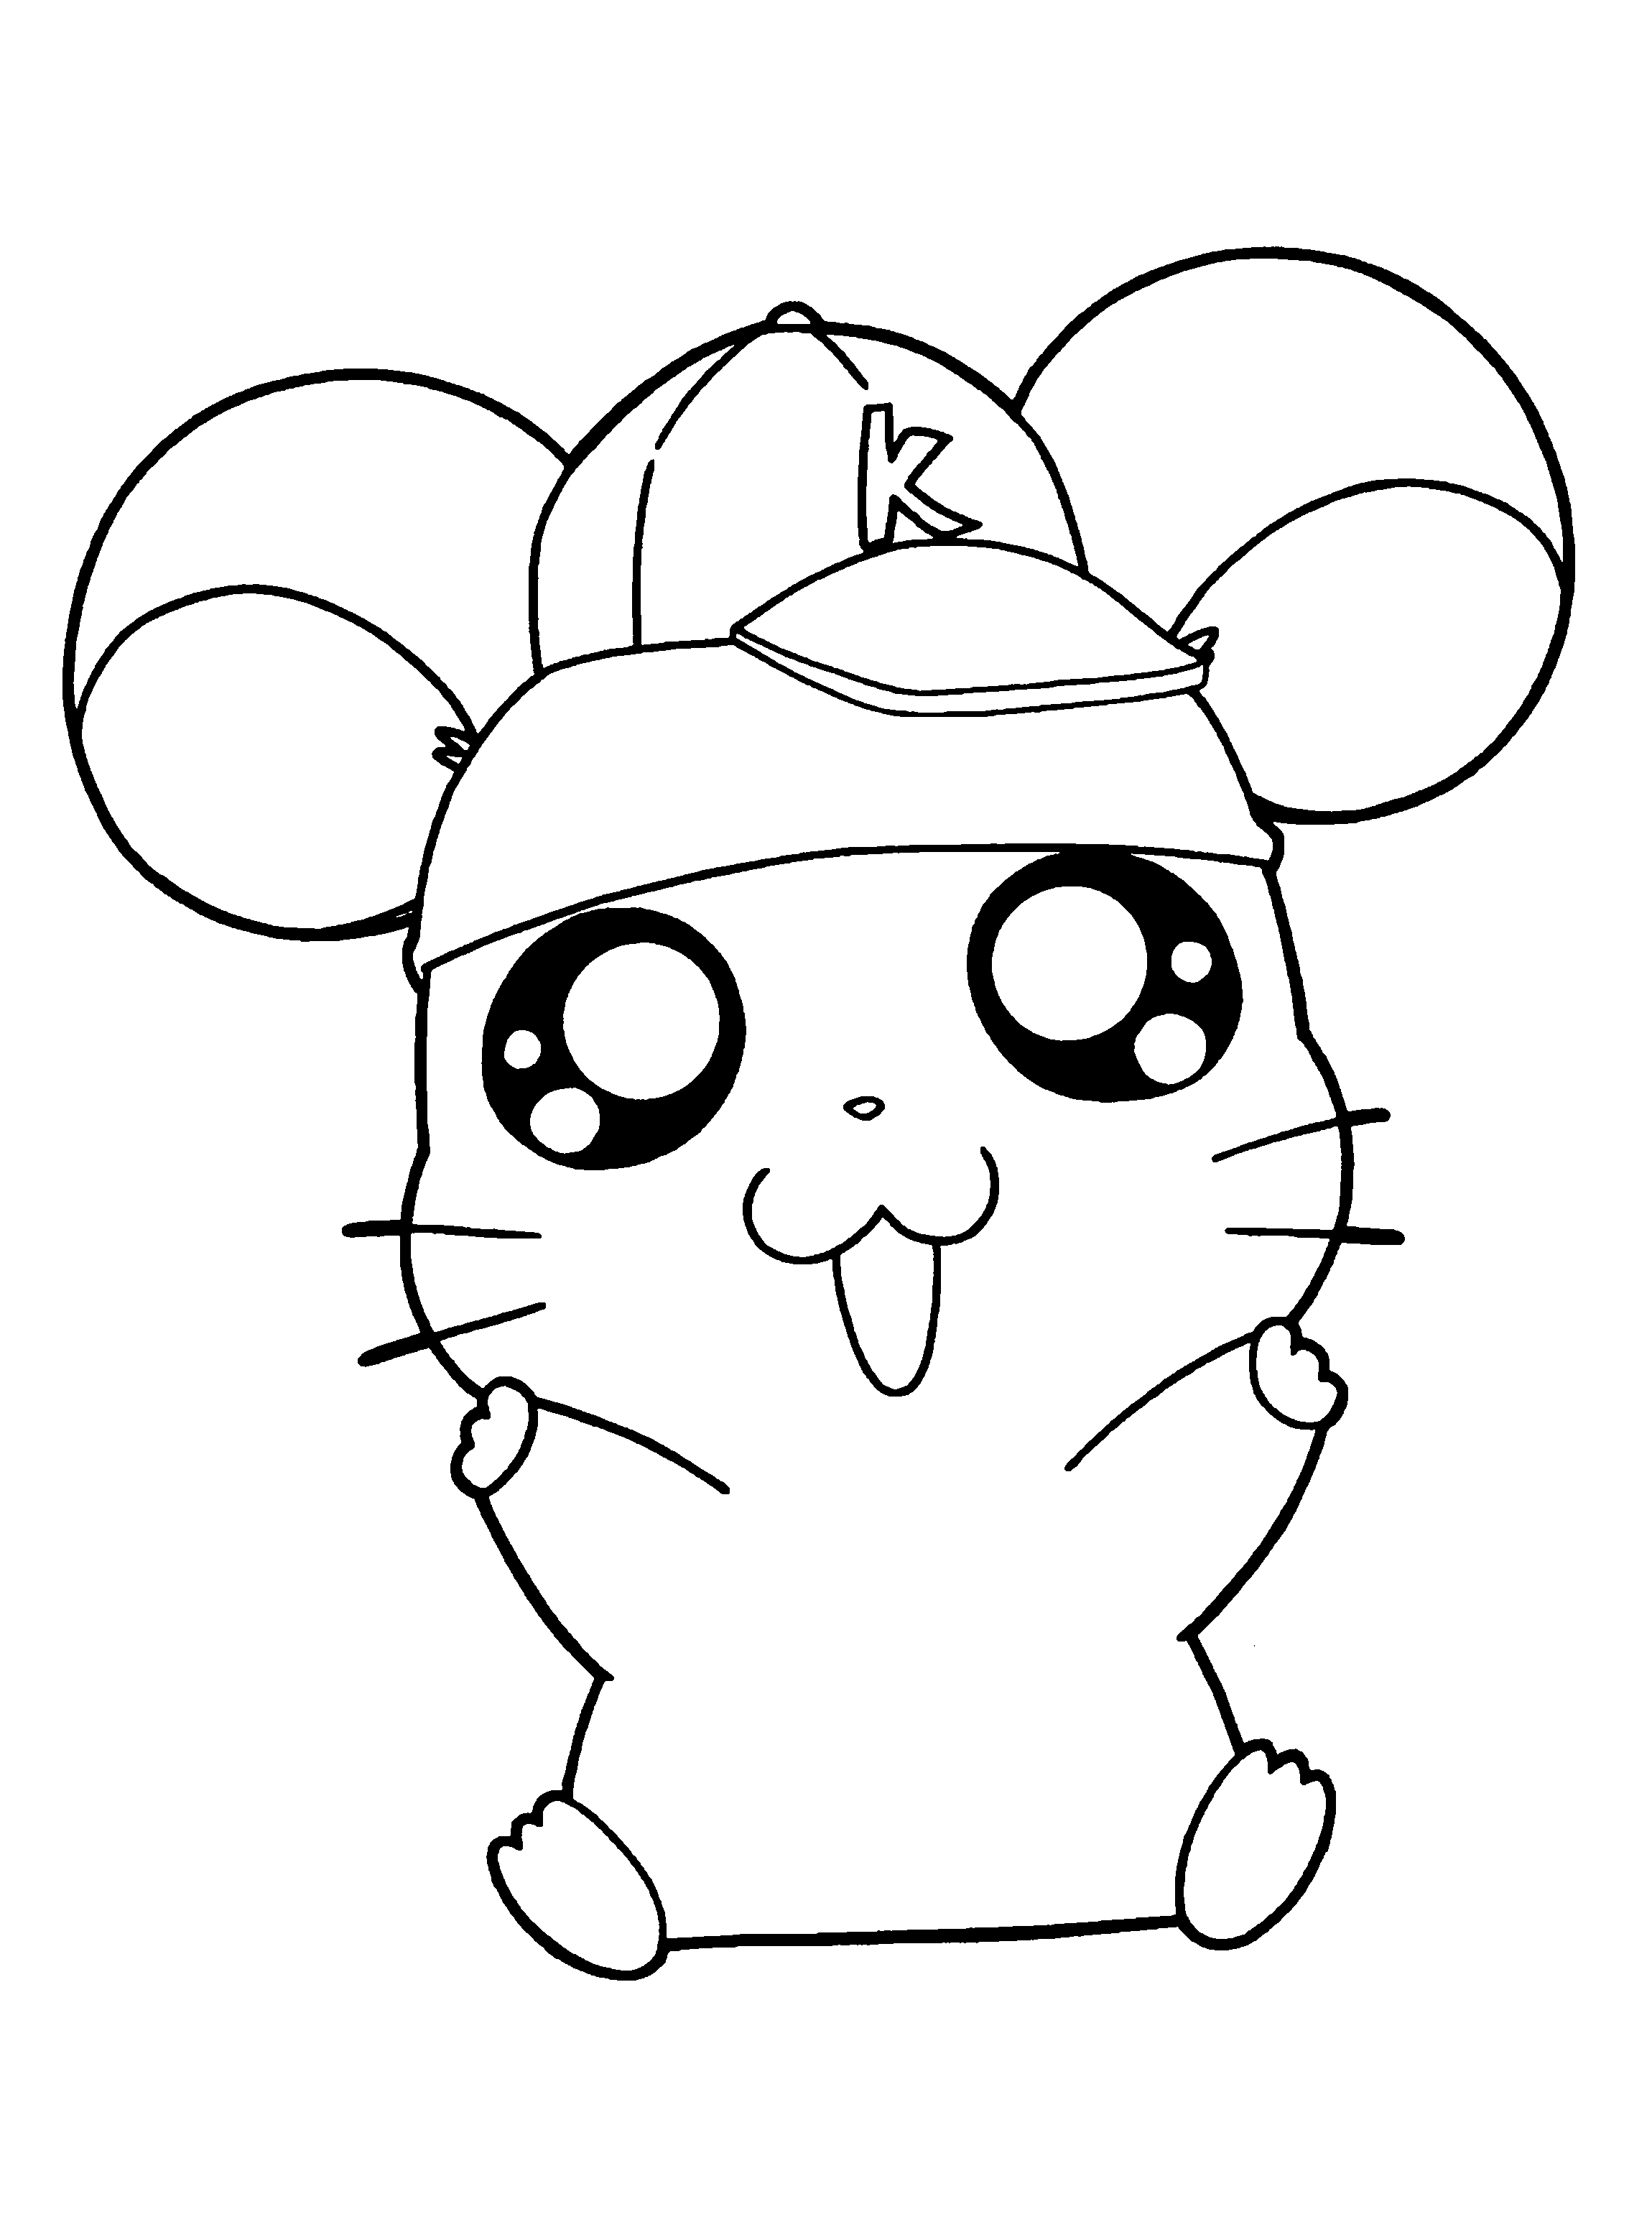 Hamster Coloring Pages at GetDrawings | Free download